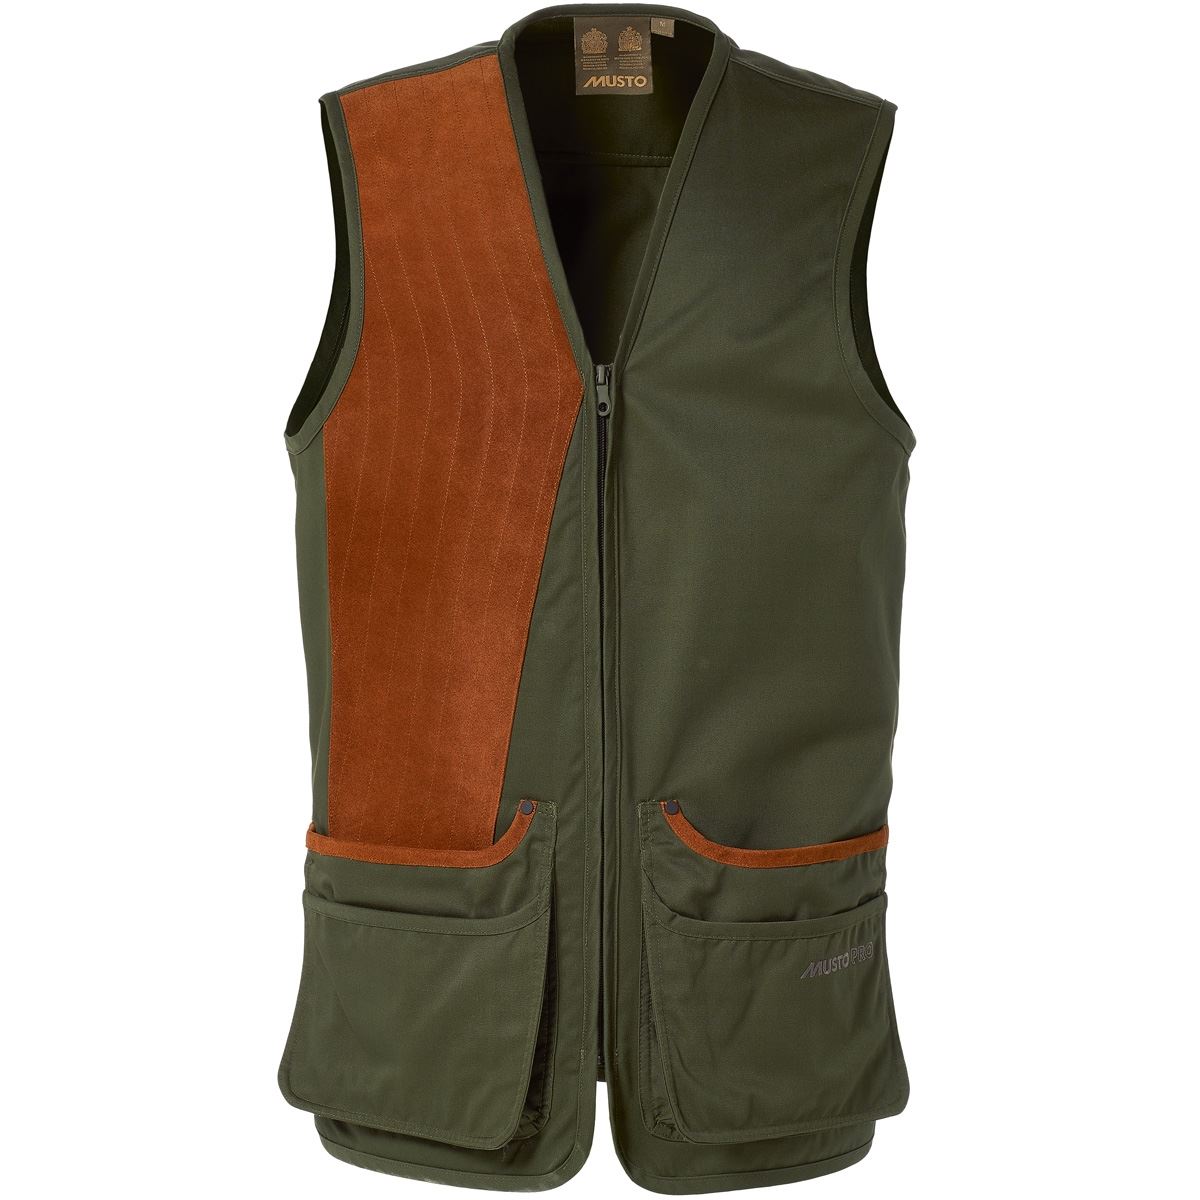 What is the location of easy access on the Musto shooting vest?